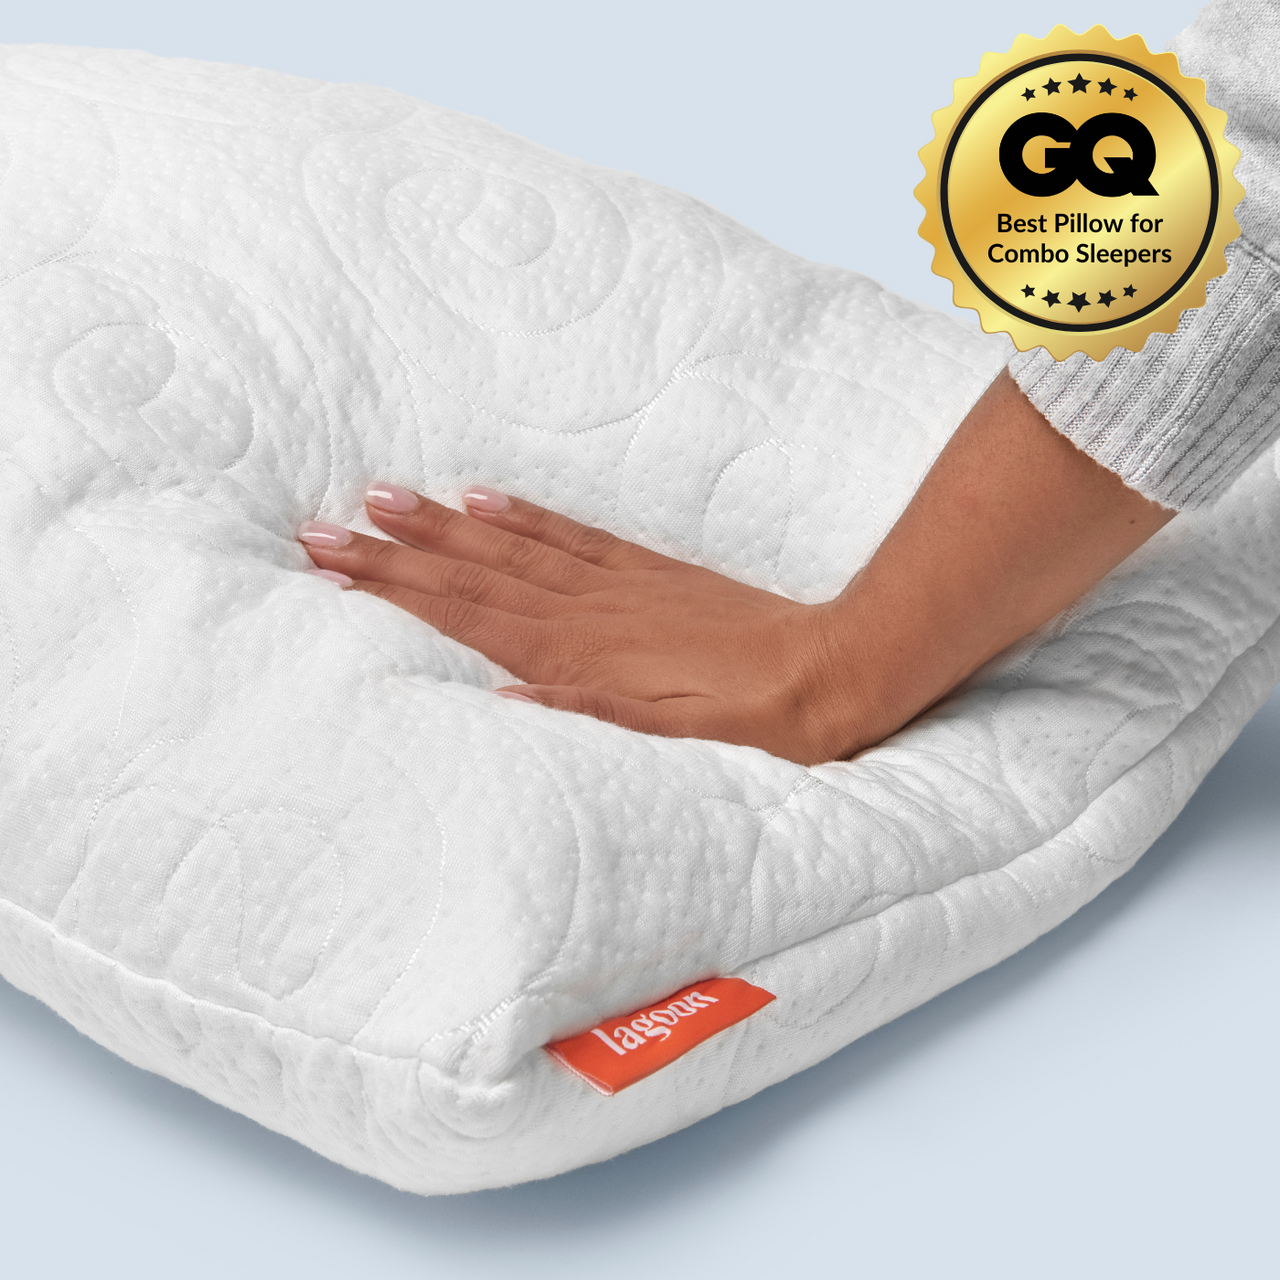 The Fox | Best Selling, Soft & Supportive Versatile Pillow